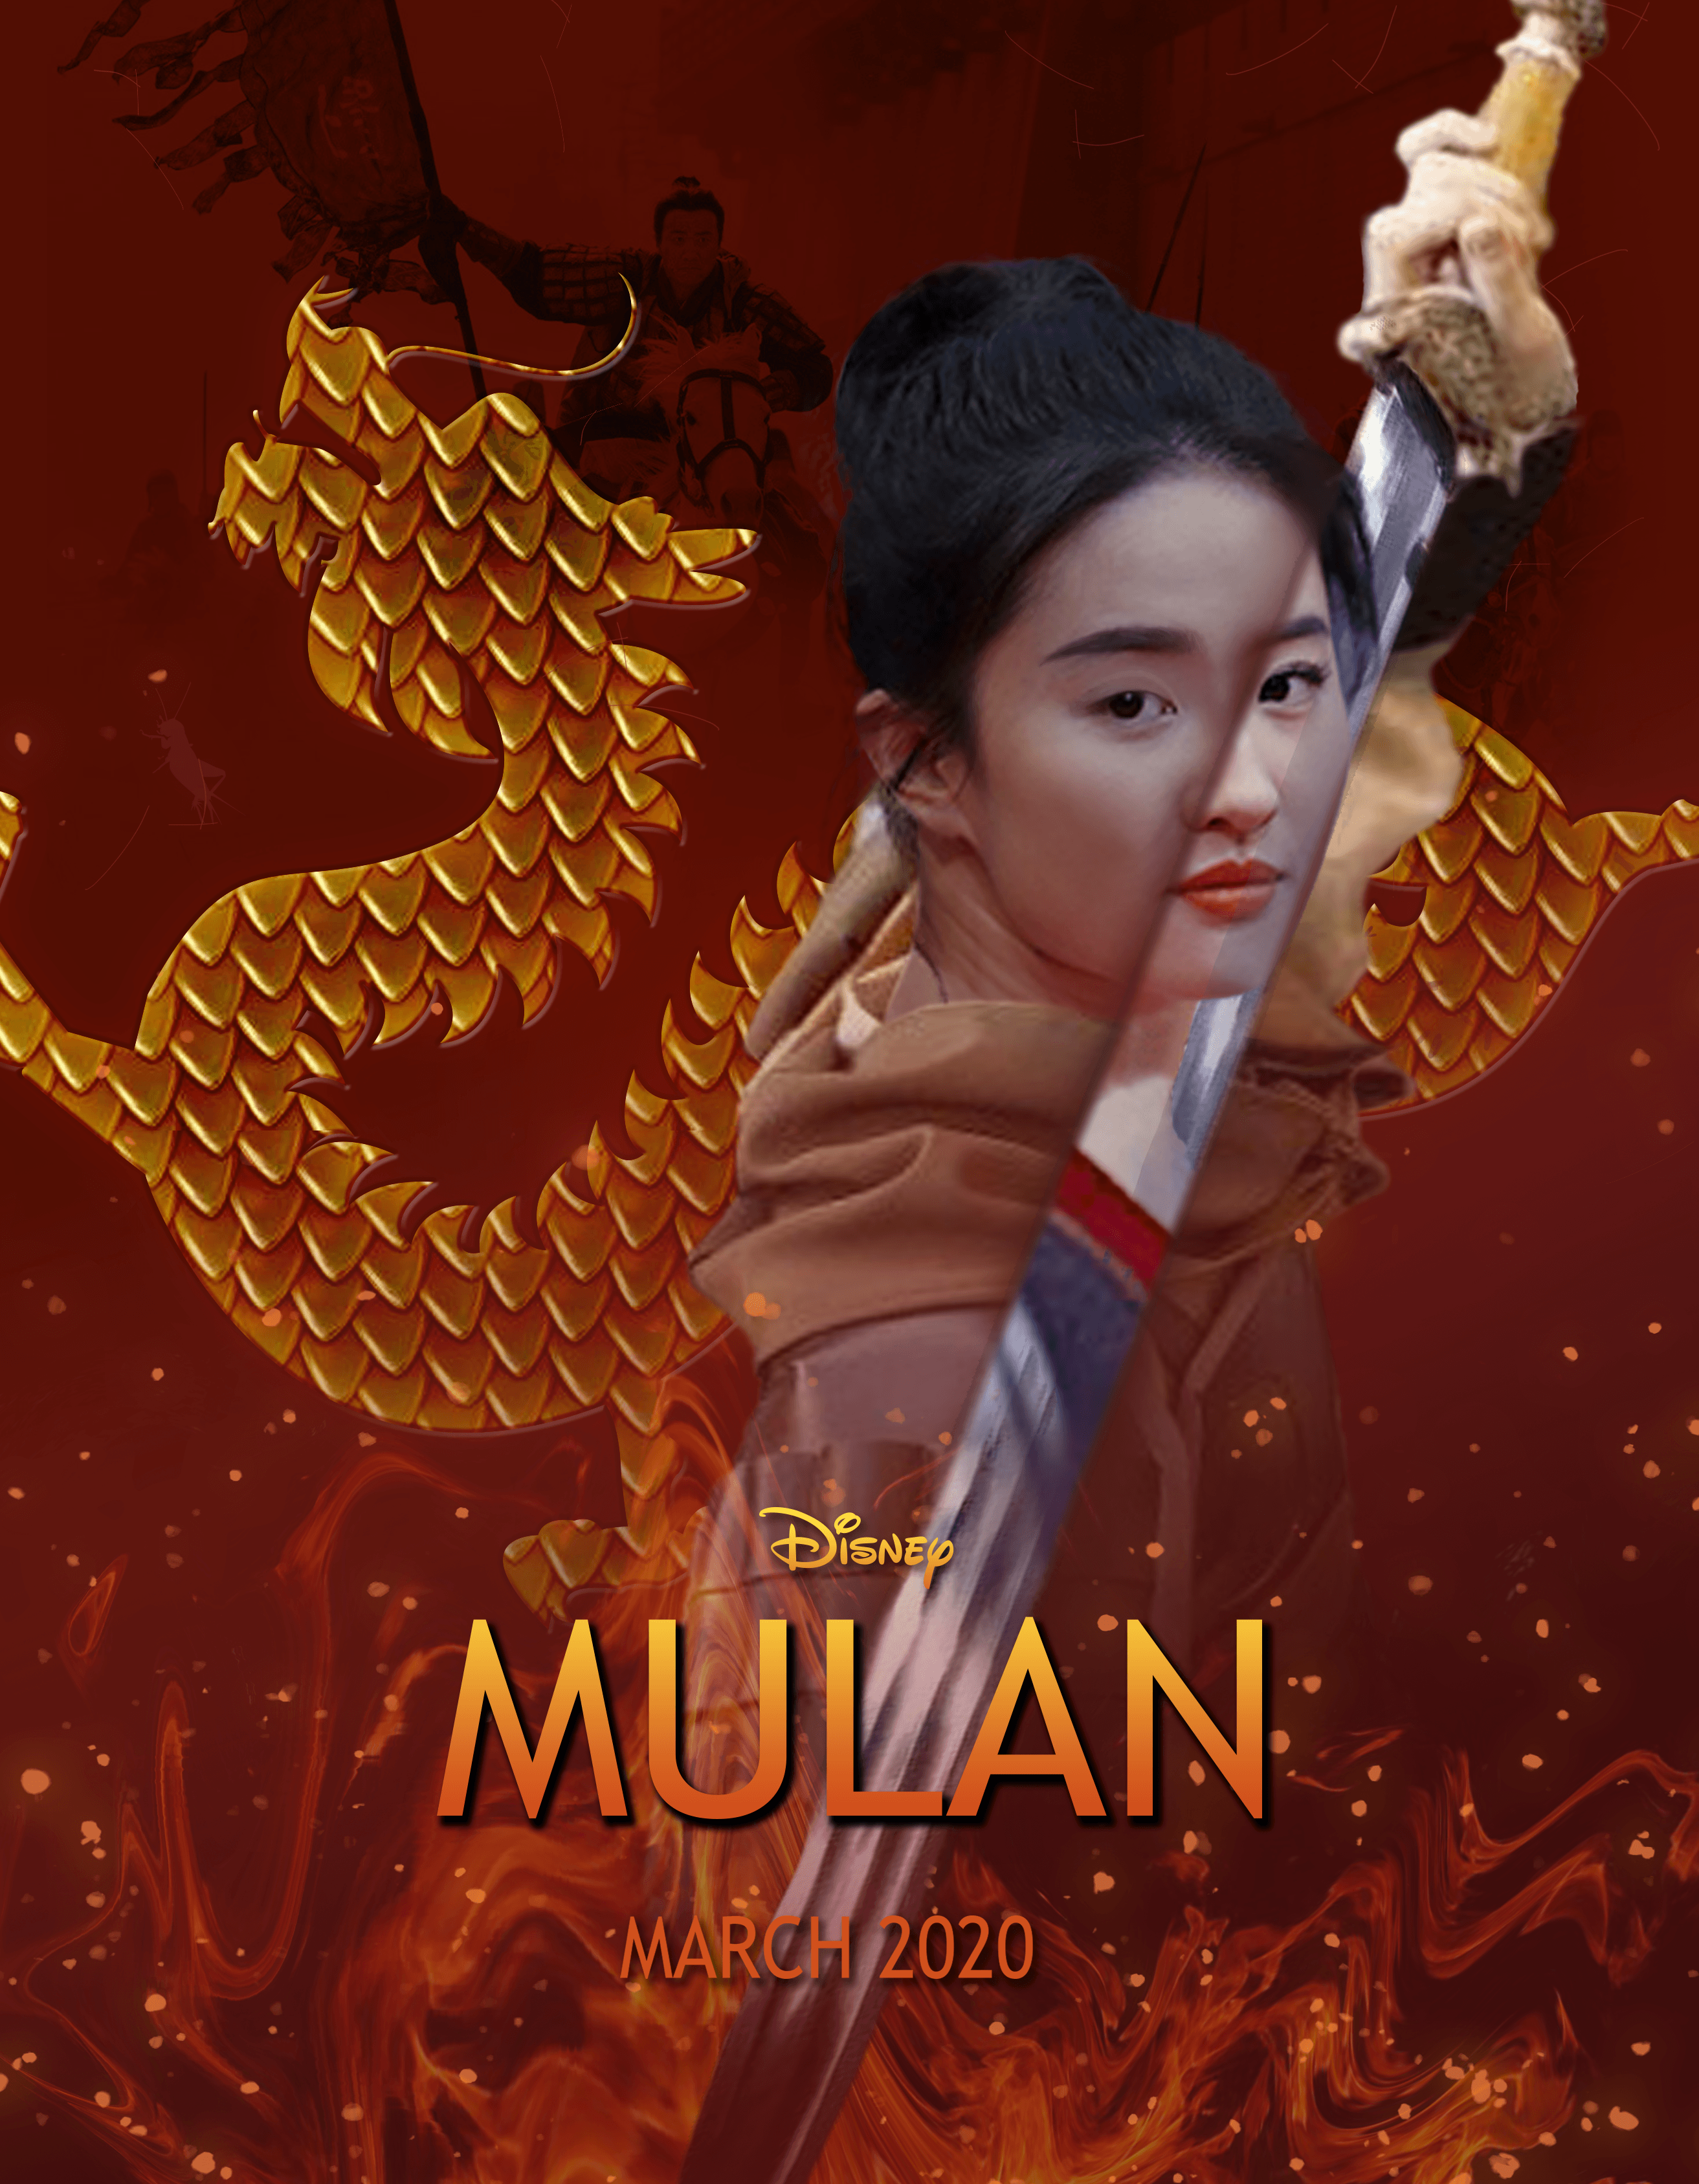 A Mulan movie poster with a woman holding a sword in front of a dragon. - Mulan